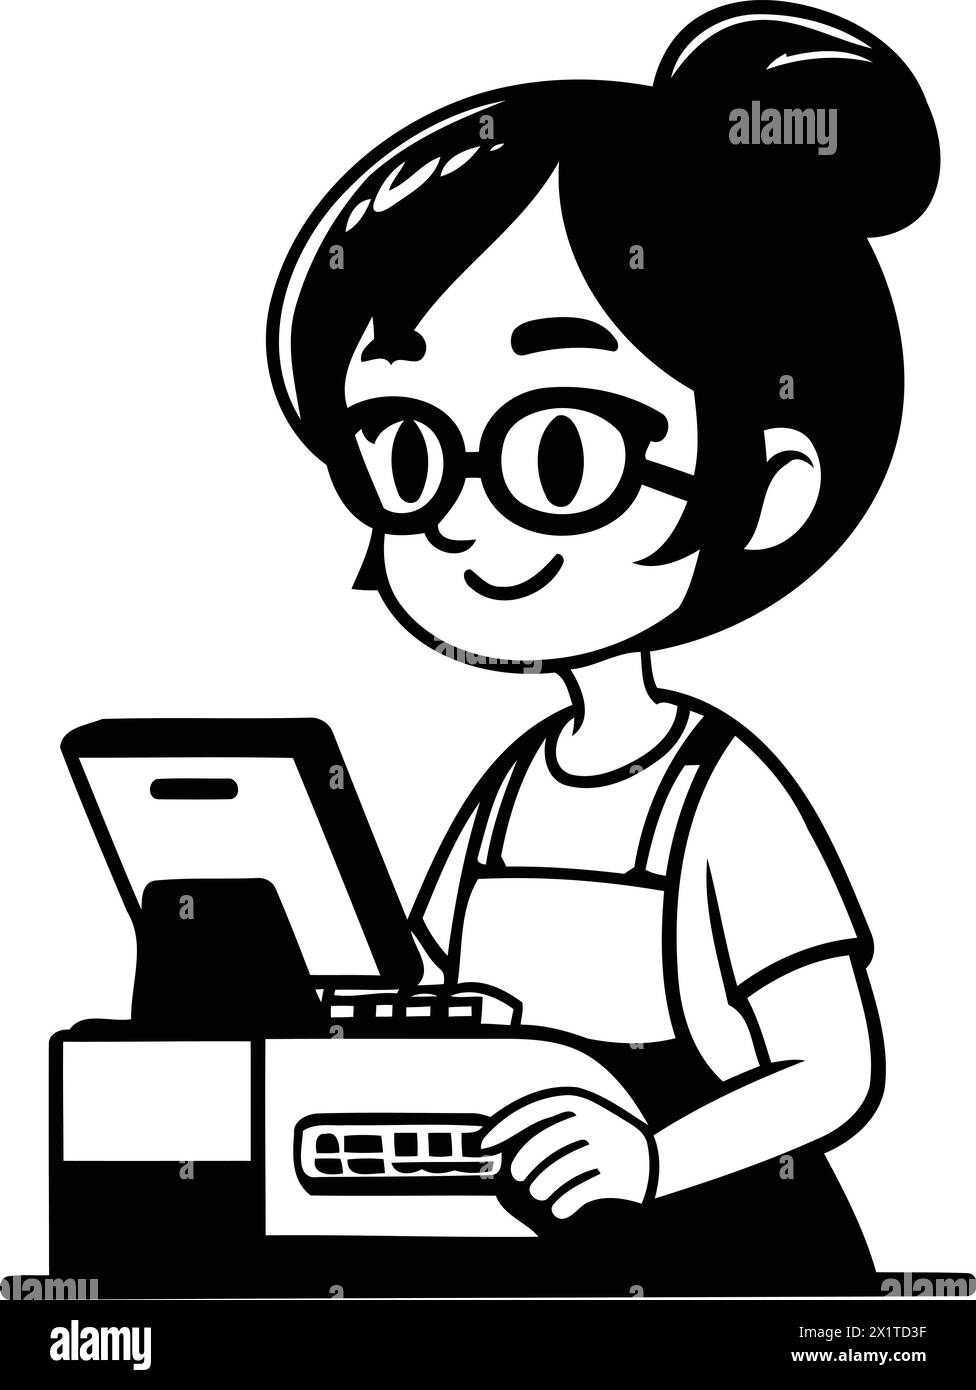 Cute cartoon girl with typewriter and cash register. Vector illustration. Stock Vector